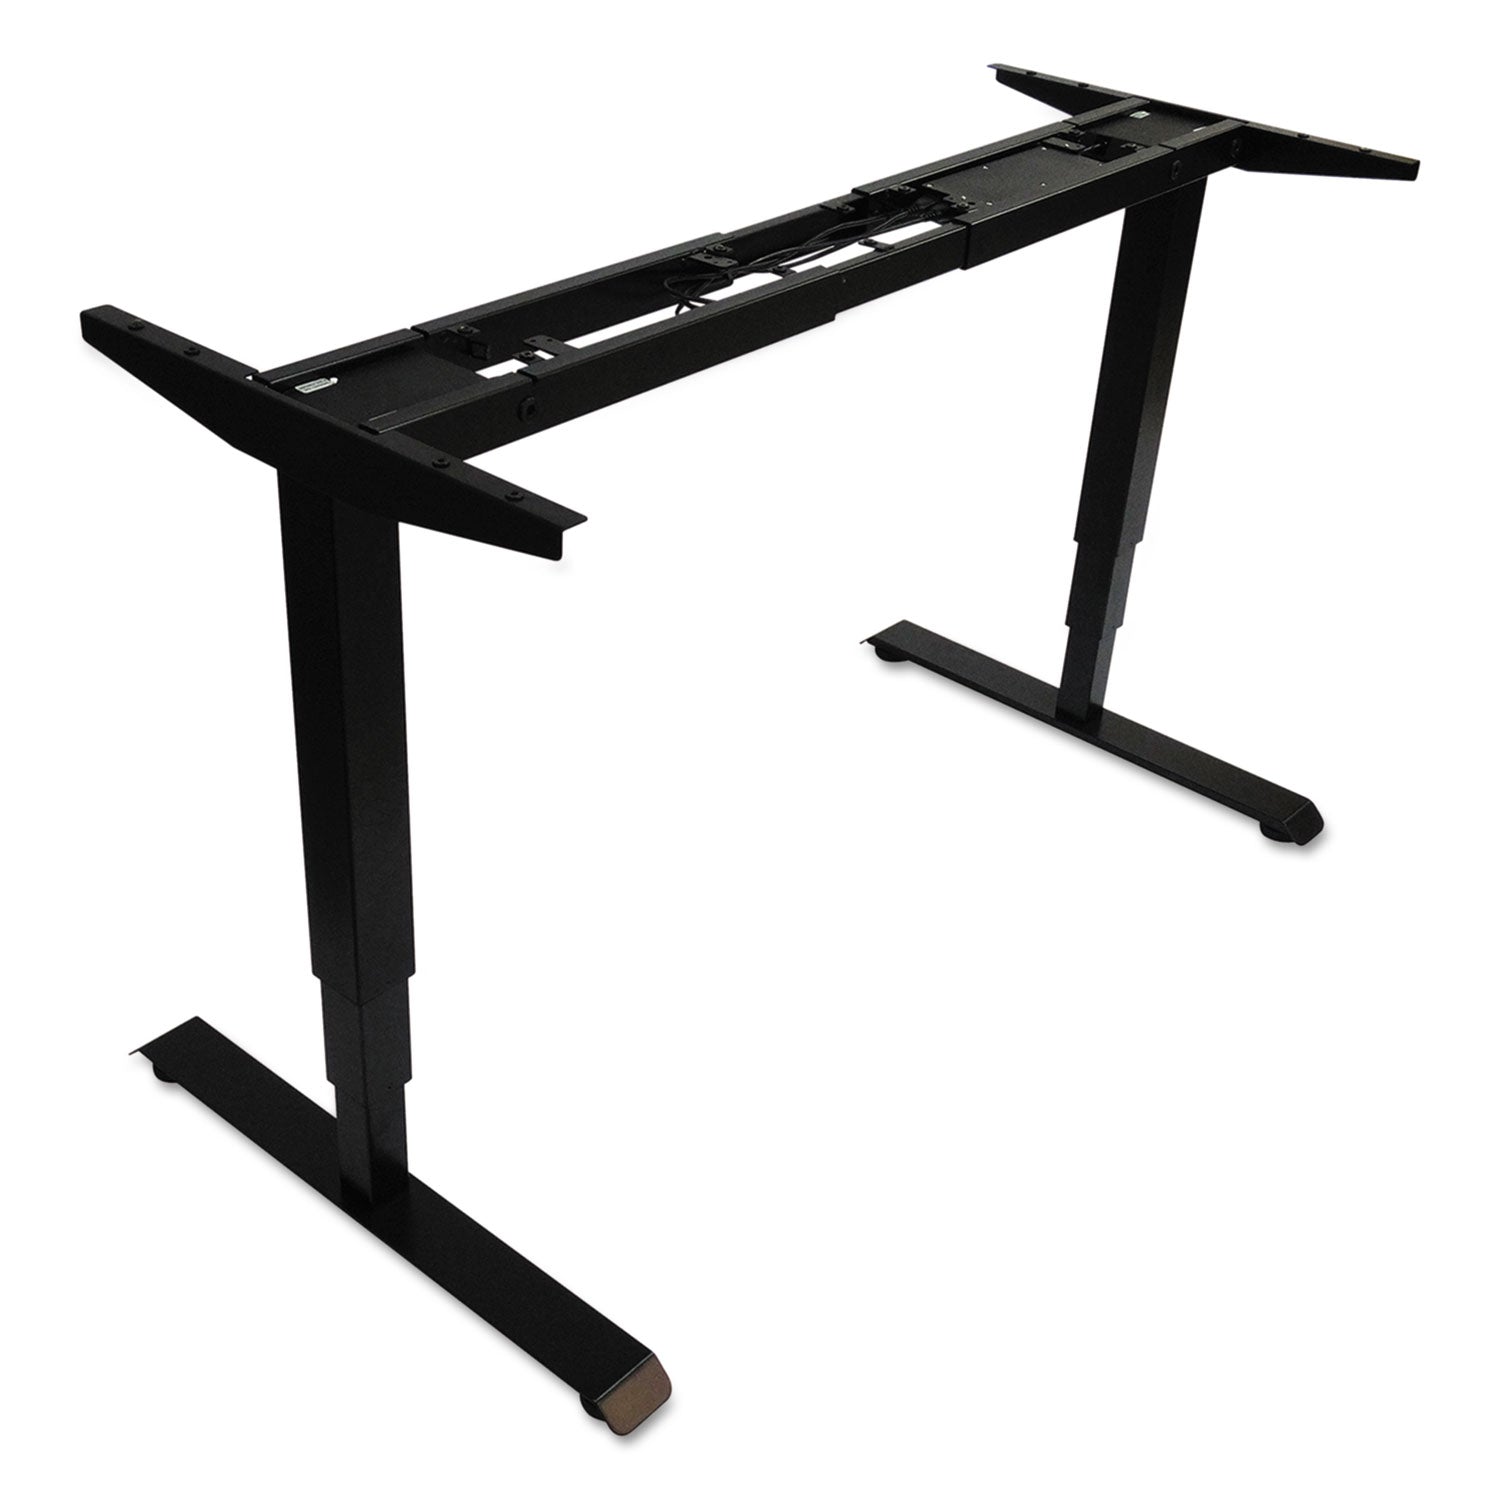 adaptivergo-sit-stand-3-stage-electric-height-adjustable-table-base-with-memory-control-4806-x-2435-x-25-to-507black_aleht3sab - 1